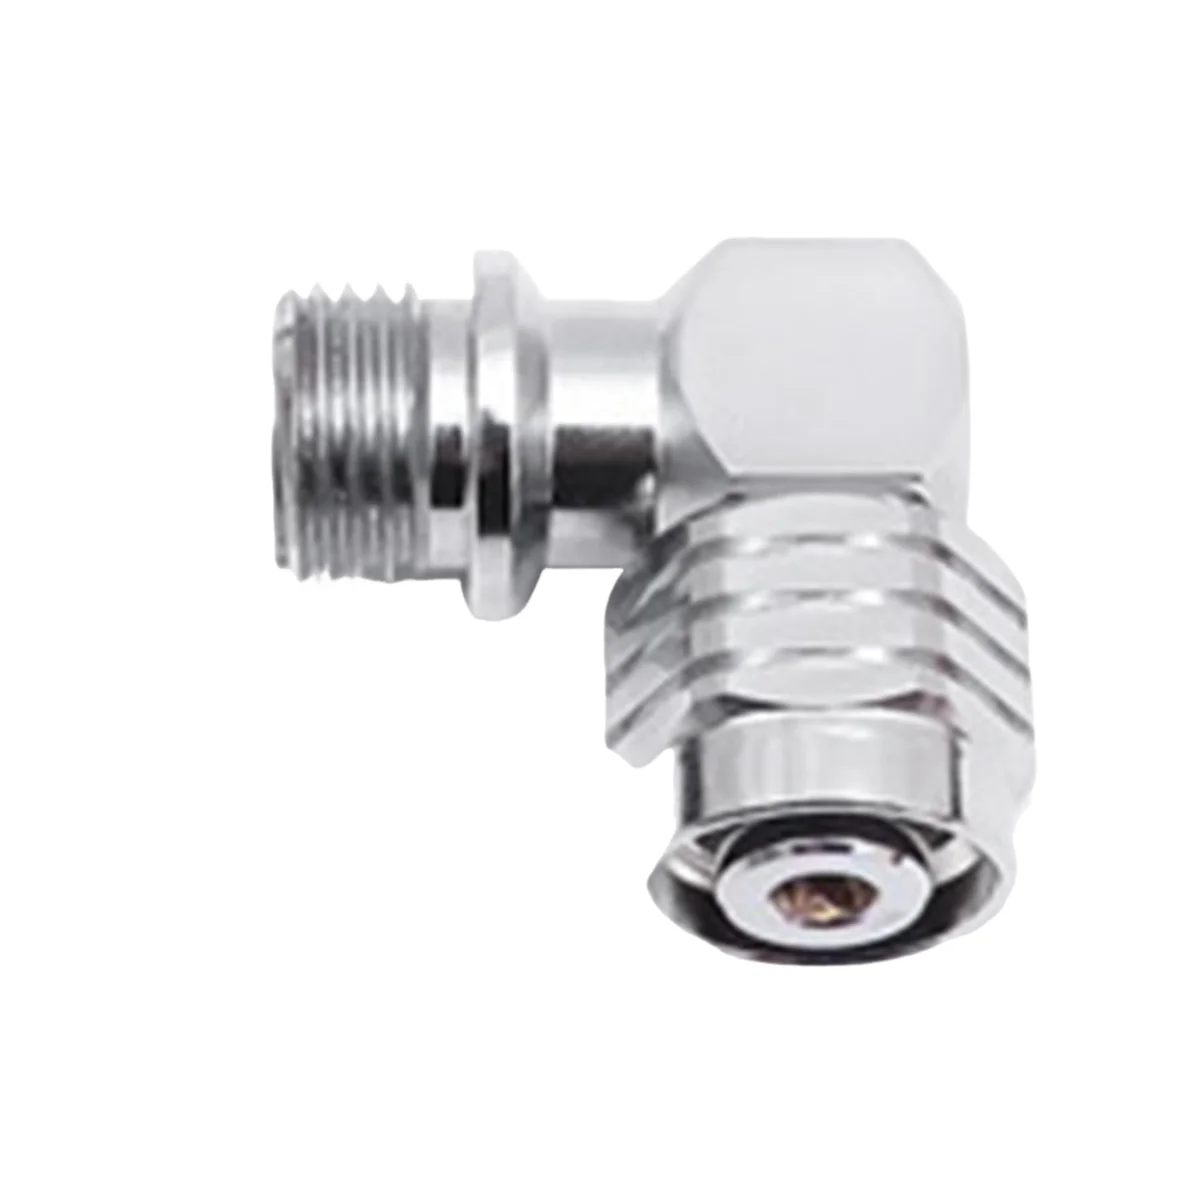 

90 Degree Swivel Hose Adapter for 2Nd Stage Scuba Diving Regulator Connector Dive Accessories